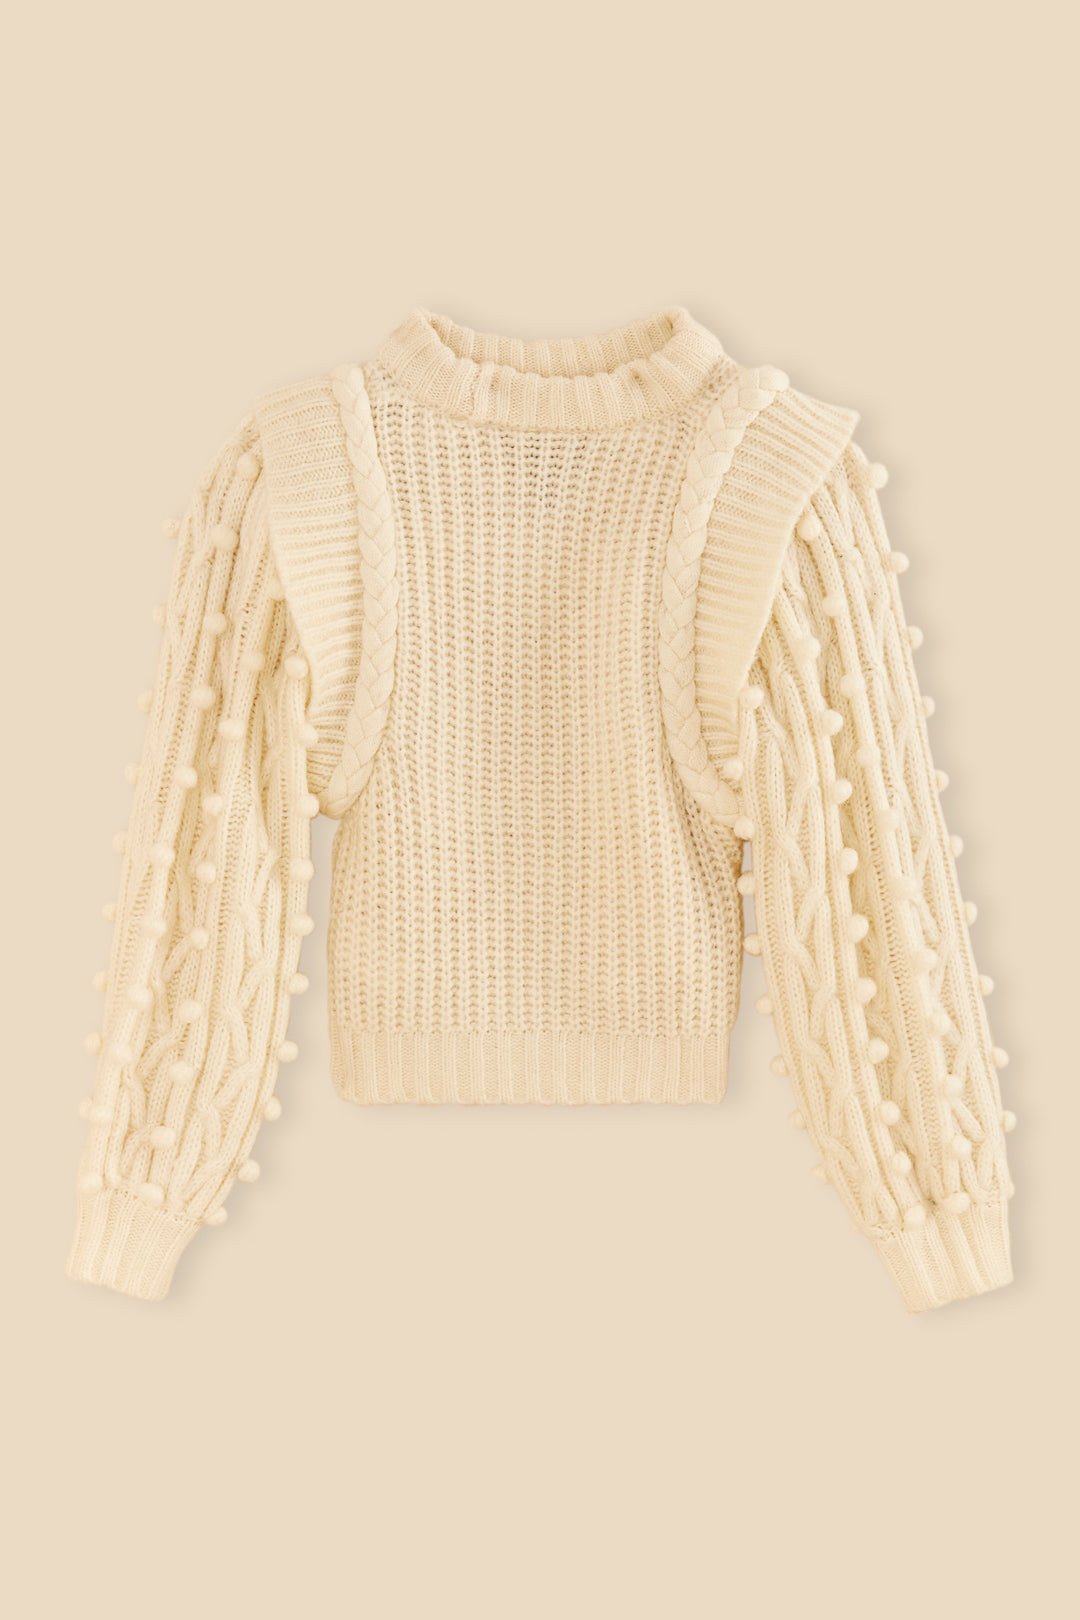 Off-White Braided Sweater